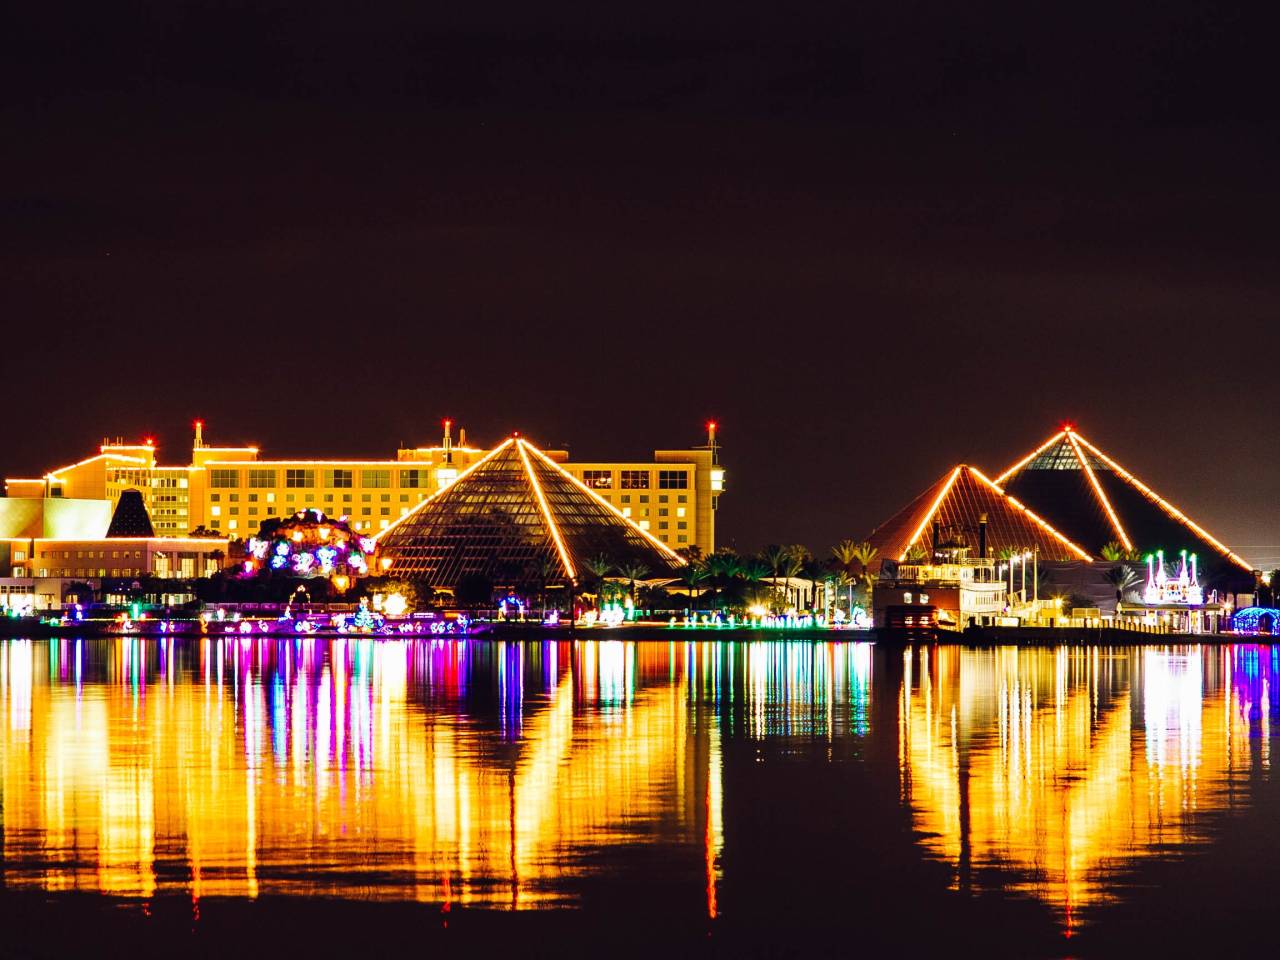 the three Moody Gardens pyramids outlined in holiday lights reflect off of the water